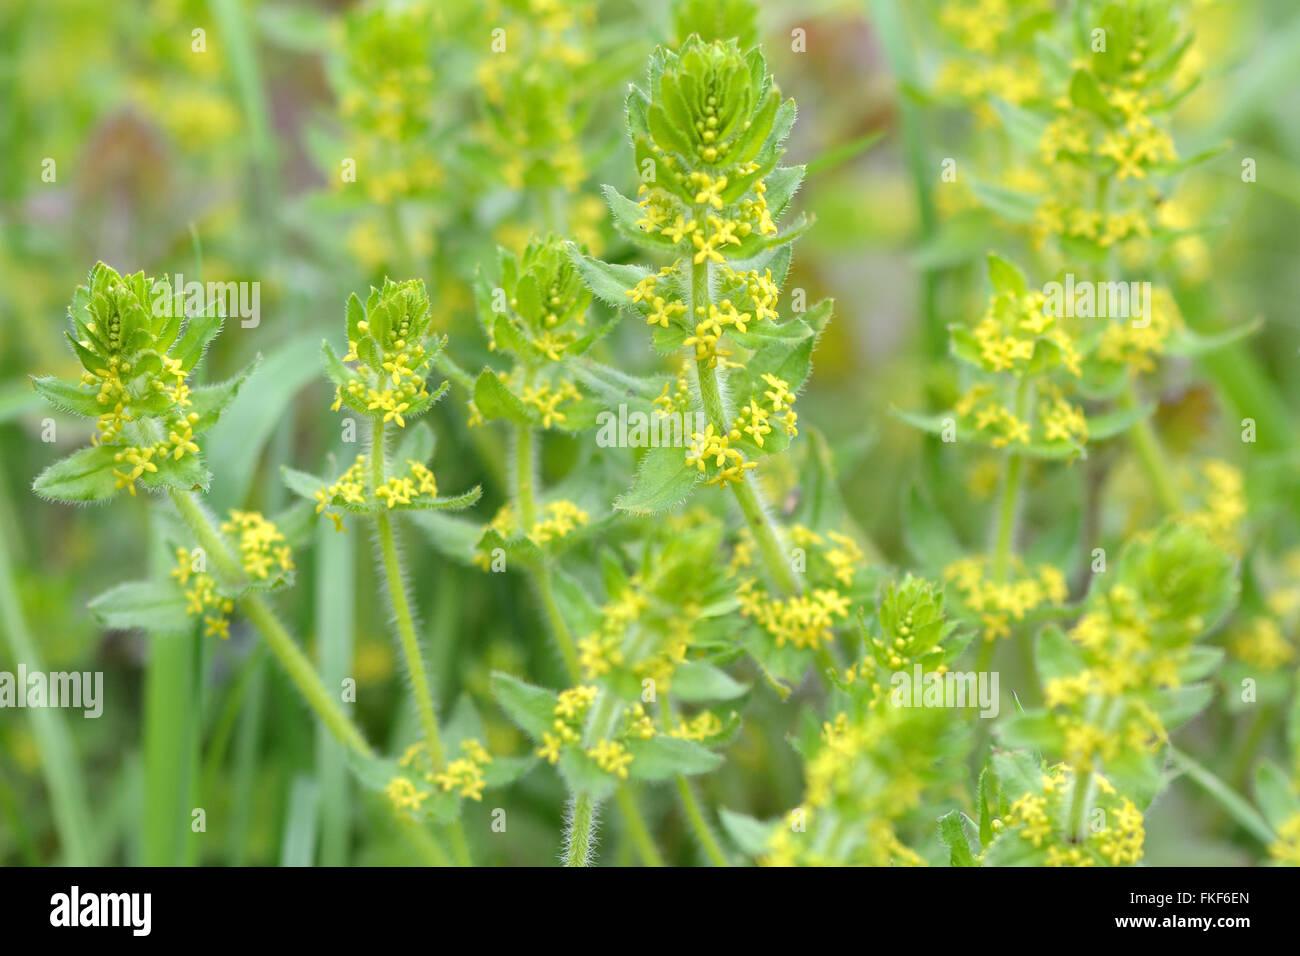 Crosswort (Galium cruciata). A low growing, yellow flowered bedstraw growing amongst on the edge of grazing land in the UK Stock Photo